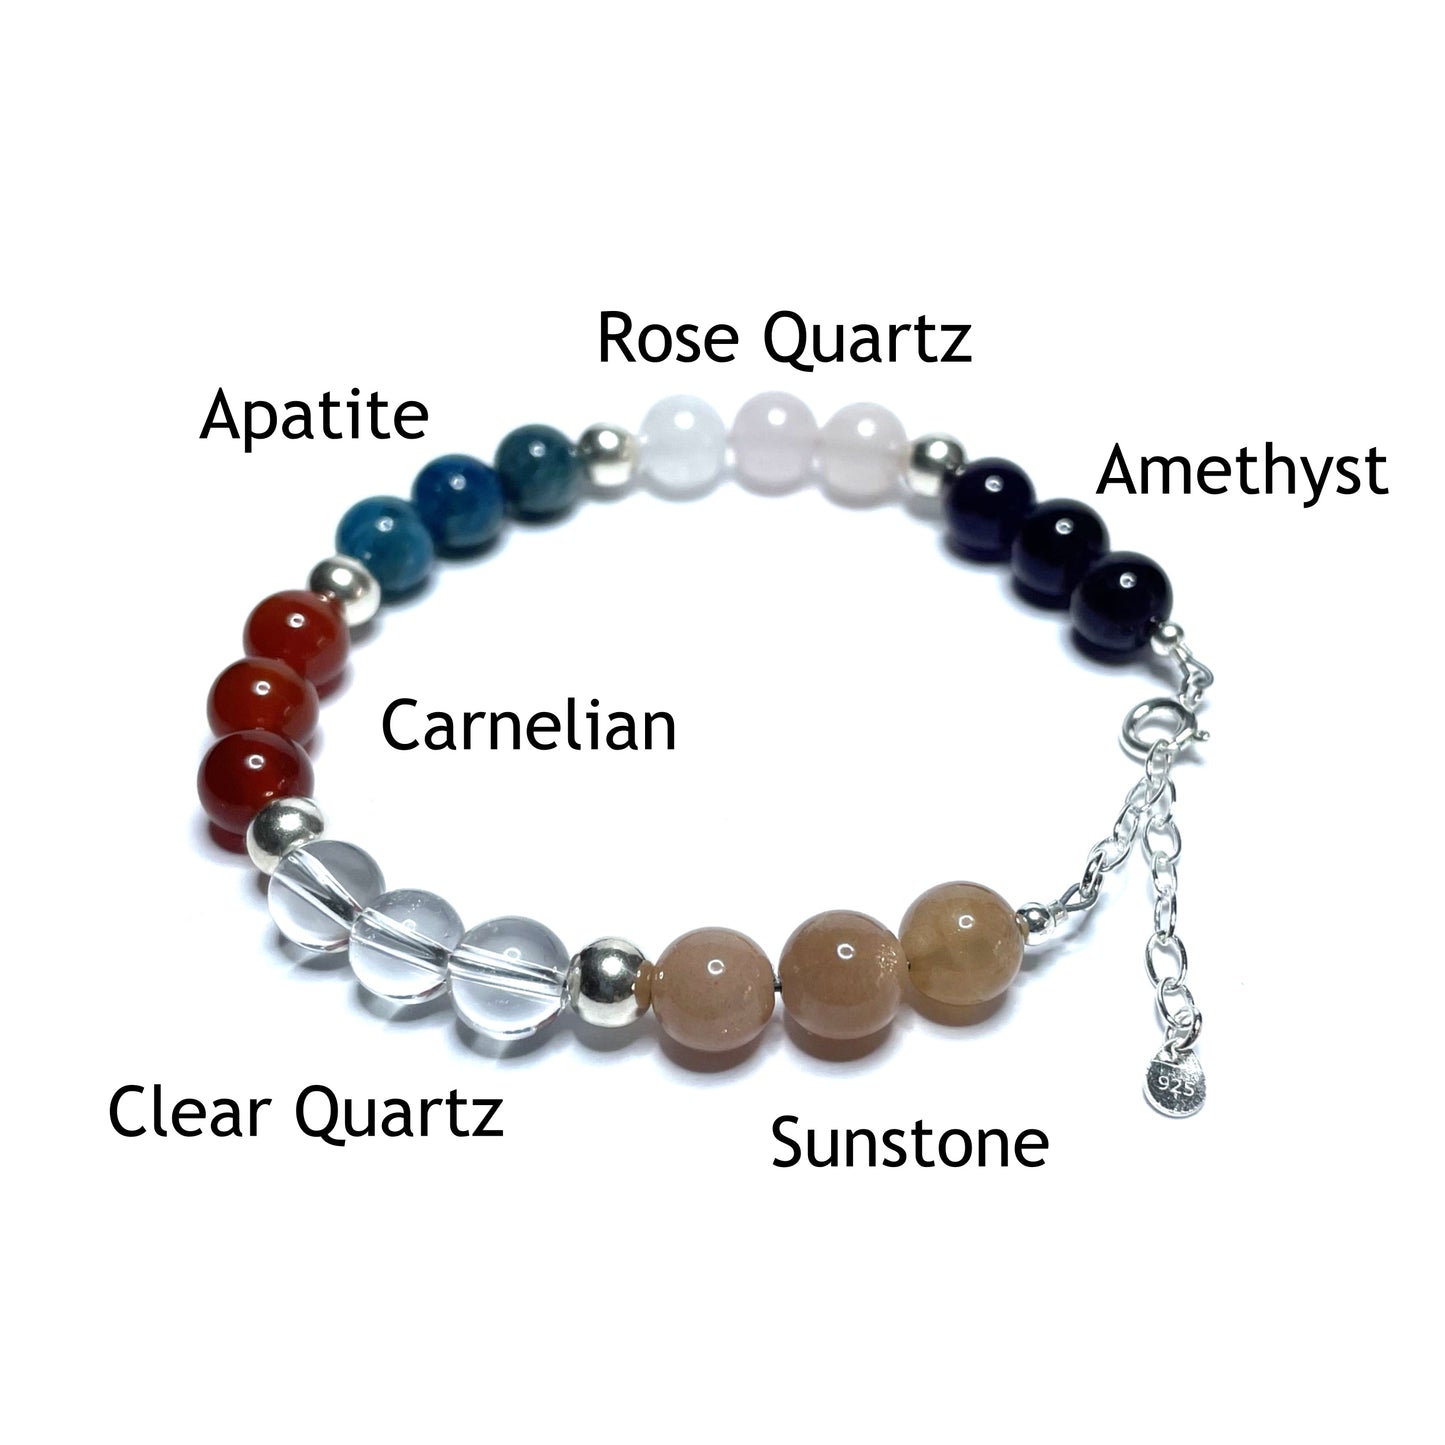 Weight loss bracelet with the beads labelled as apatite, amethyst, clear quartz, sunstone, rose quartz and carnelian